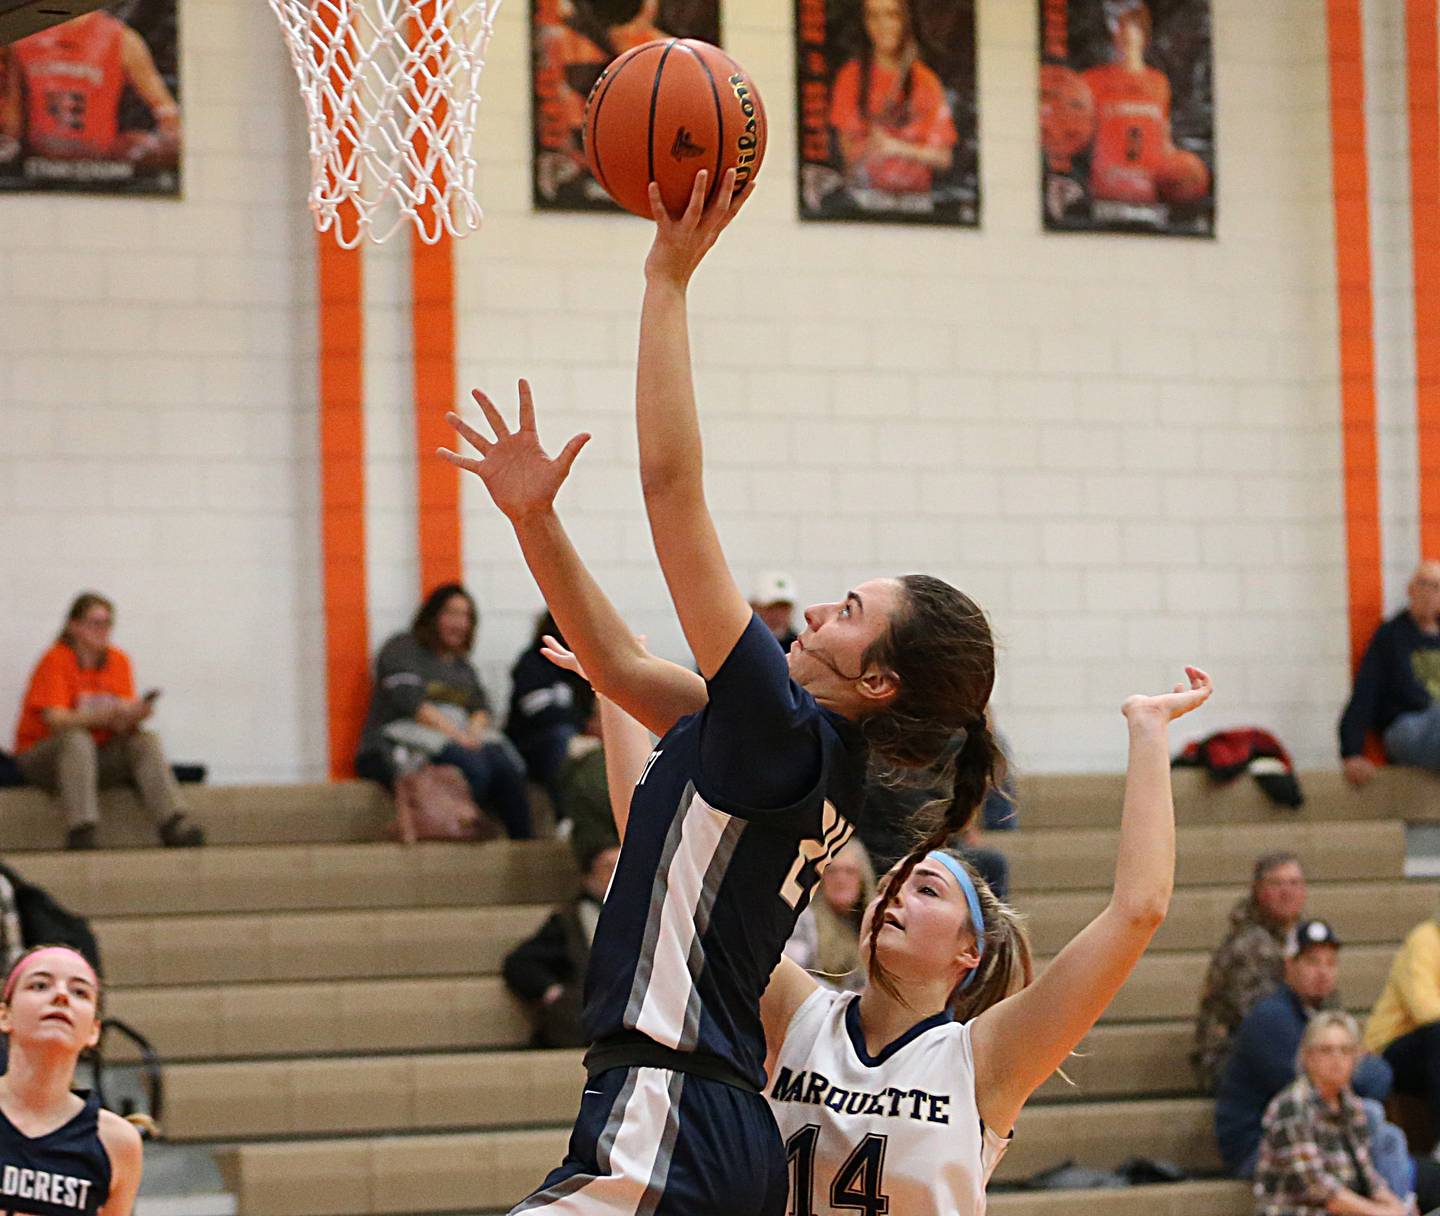 Fieldcrest's Ashlyn May (24) works her way around Marquette's Izzy Garkey (14) to score on a layup in the Integrated Seed Lady Falcon Basketball Classic on Thursday, Nov. 17, 2022 in Flanagan.